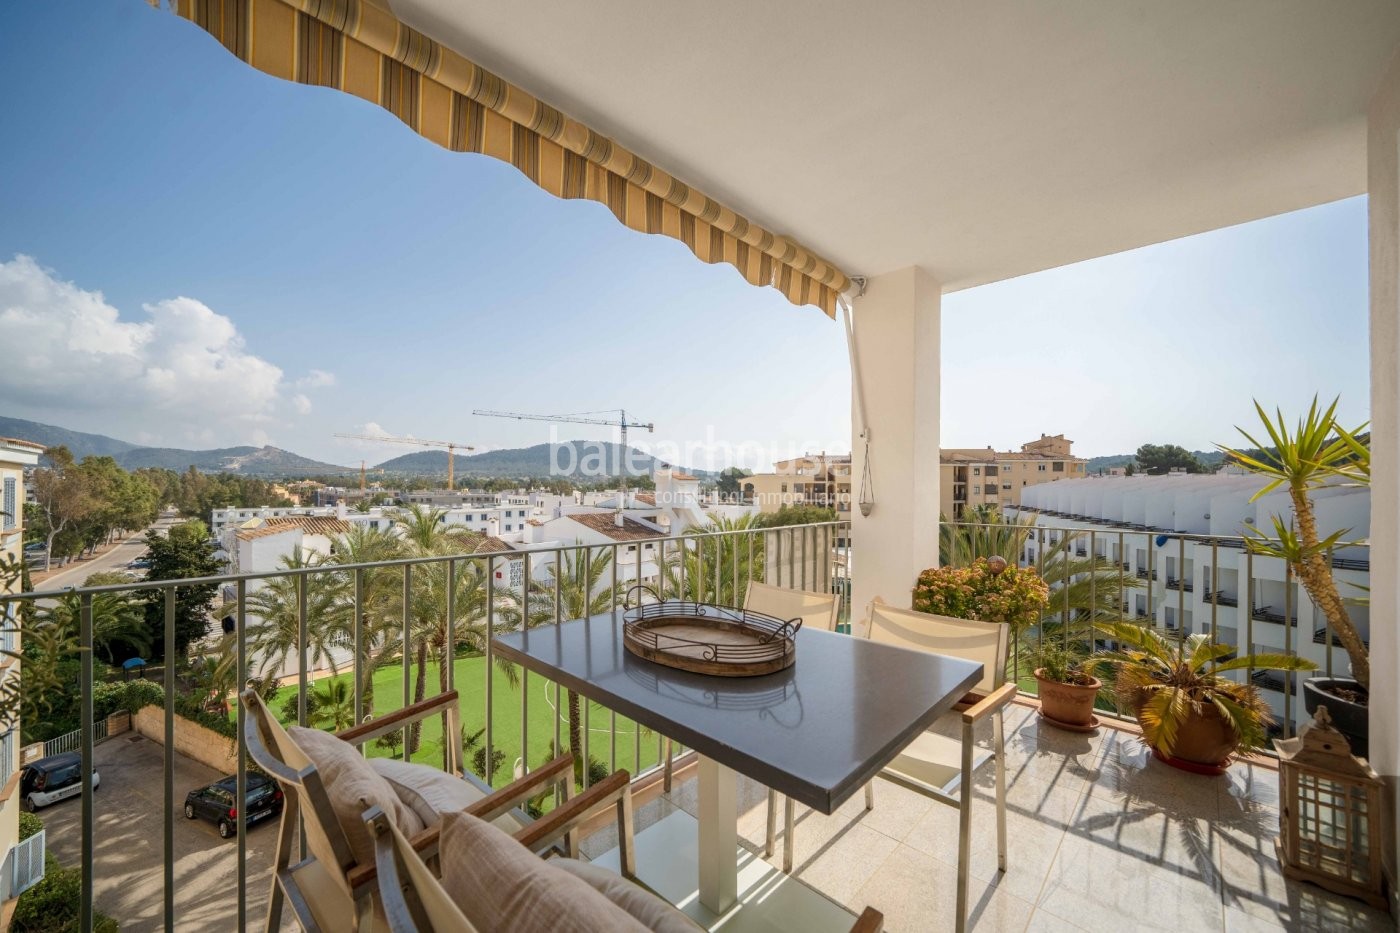 Fantastic bright and spacious apartment with terrace, garden and pool on the coast of Santa Ponsa.